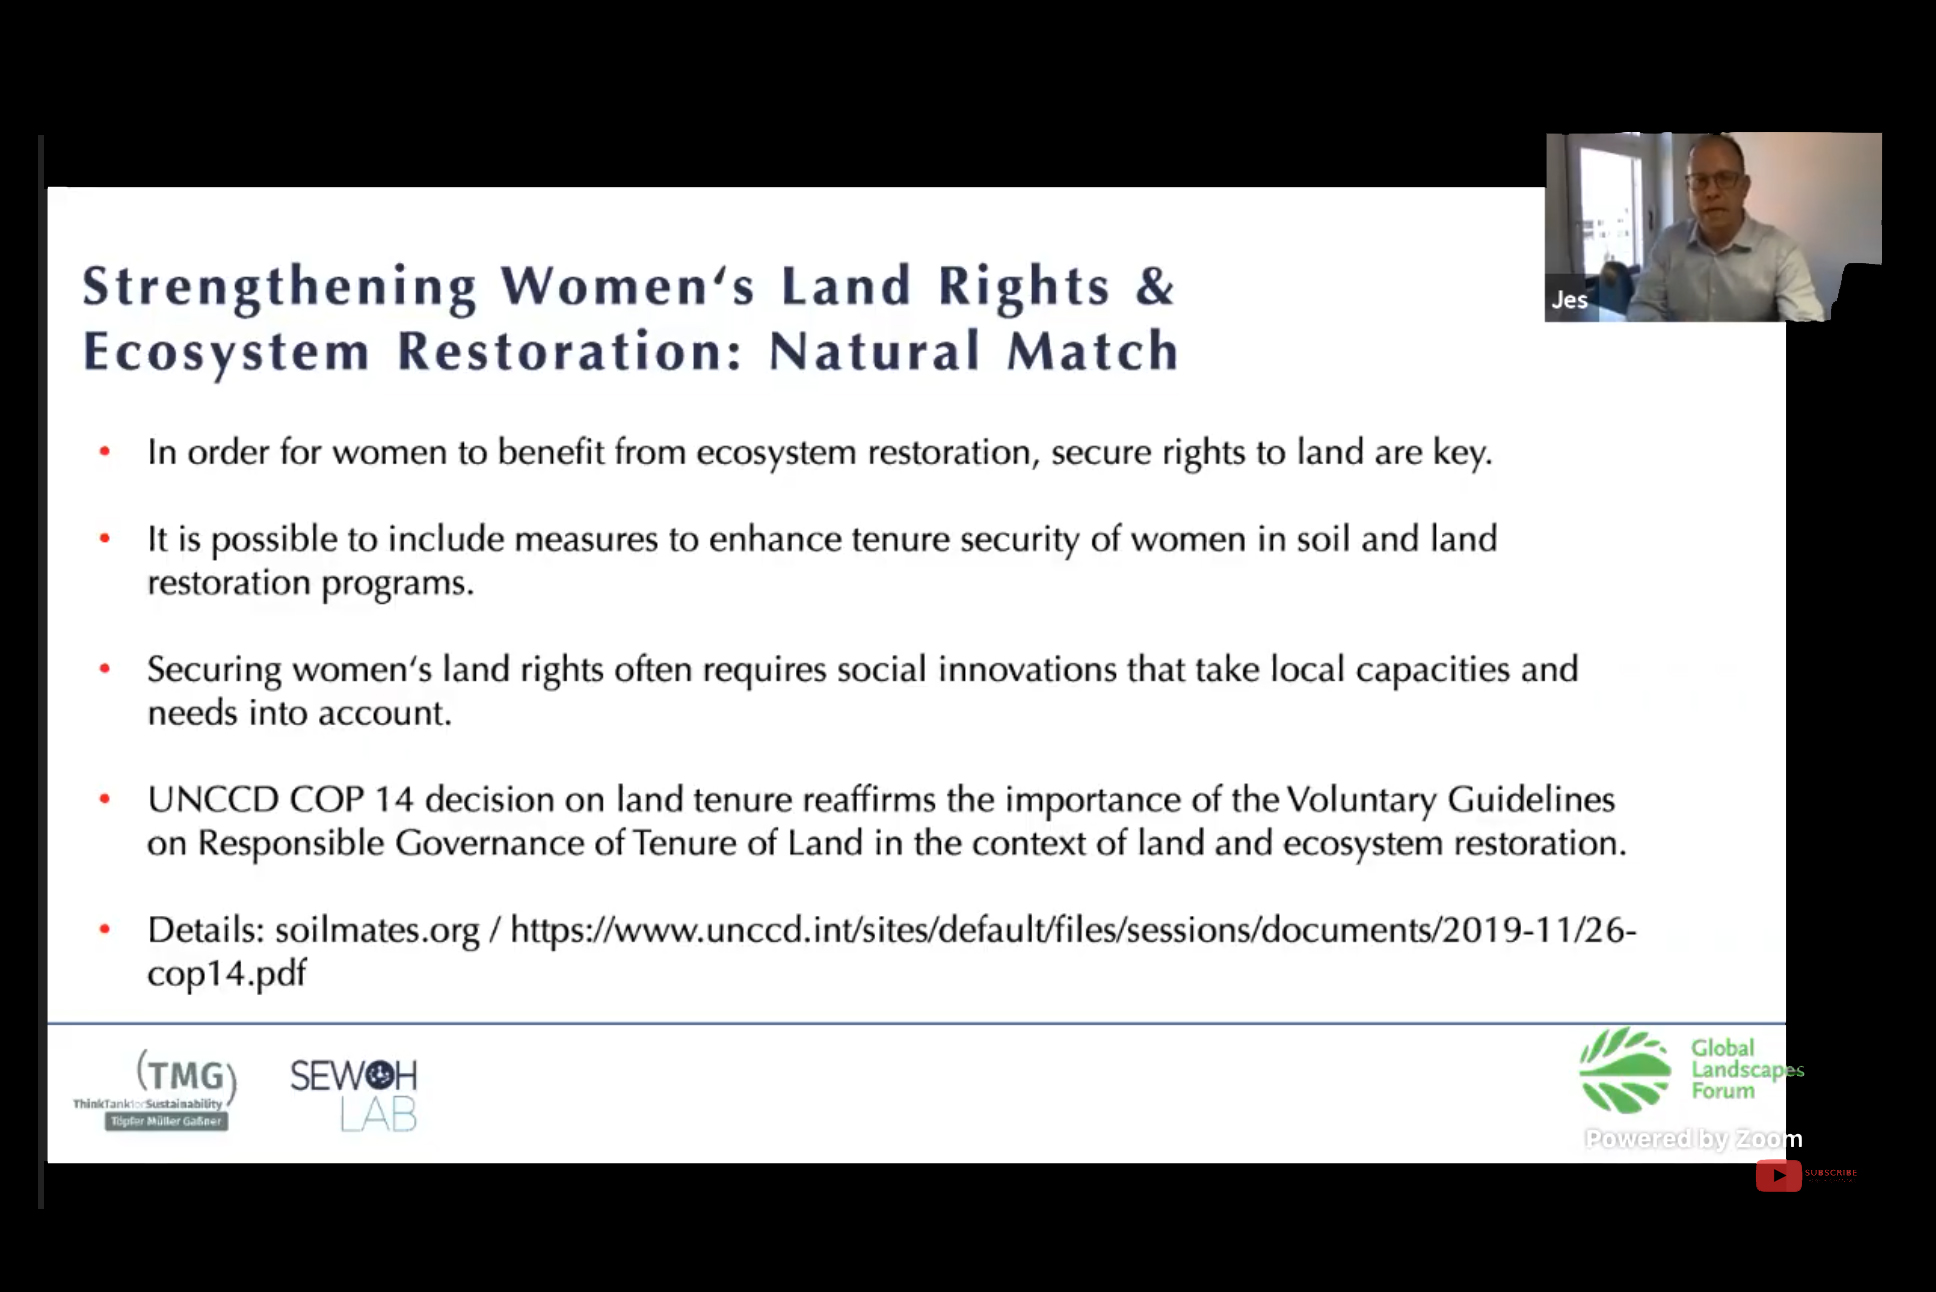 A slide outlining how to strengthen women's land rights through ecosystem restoration